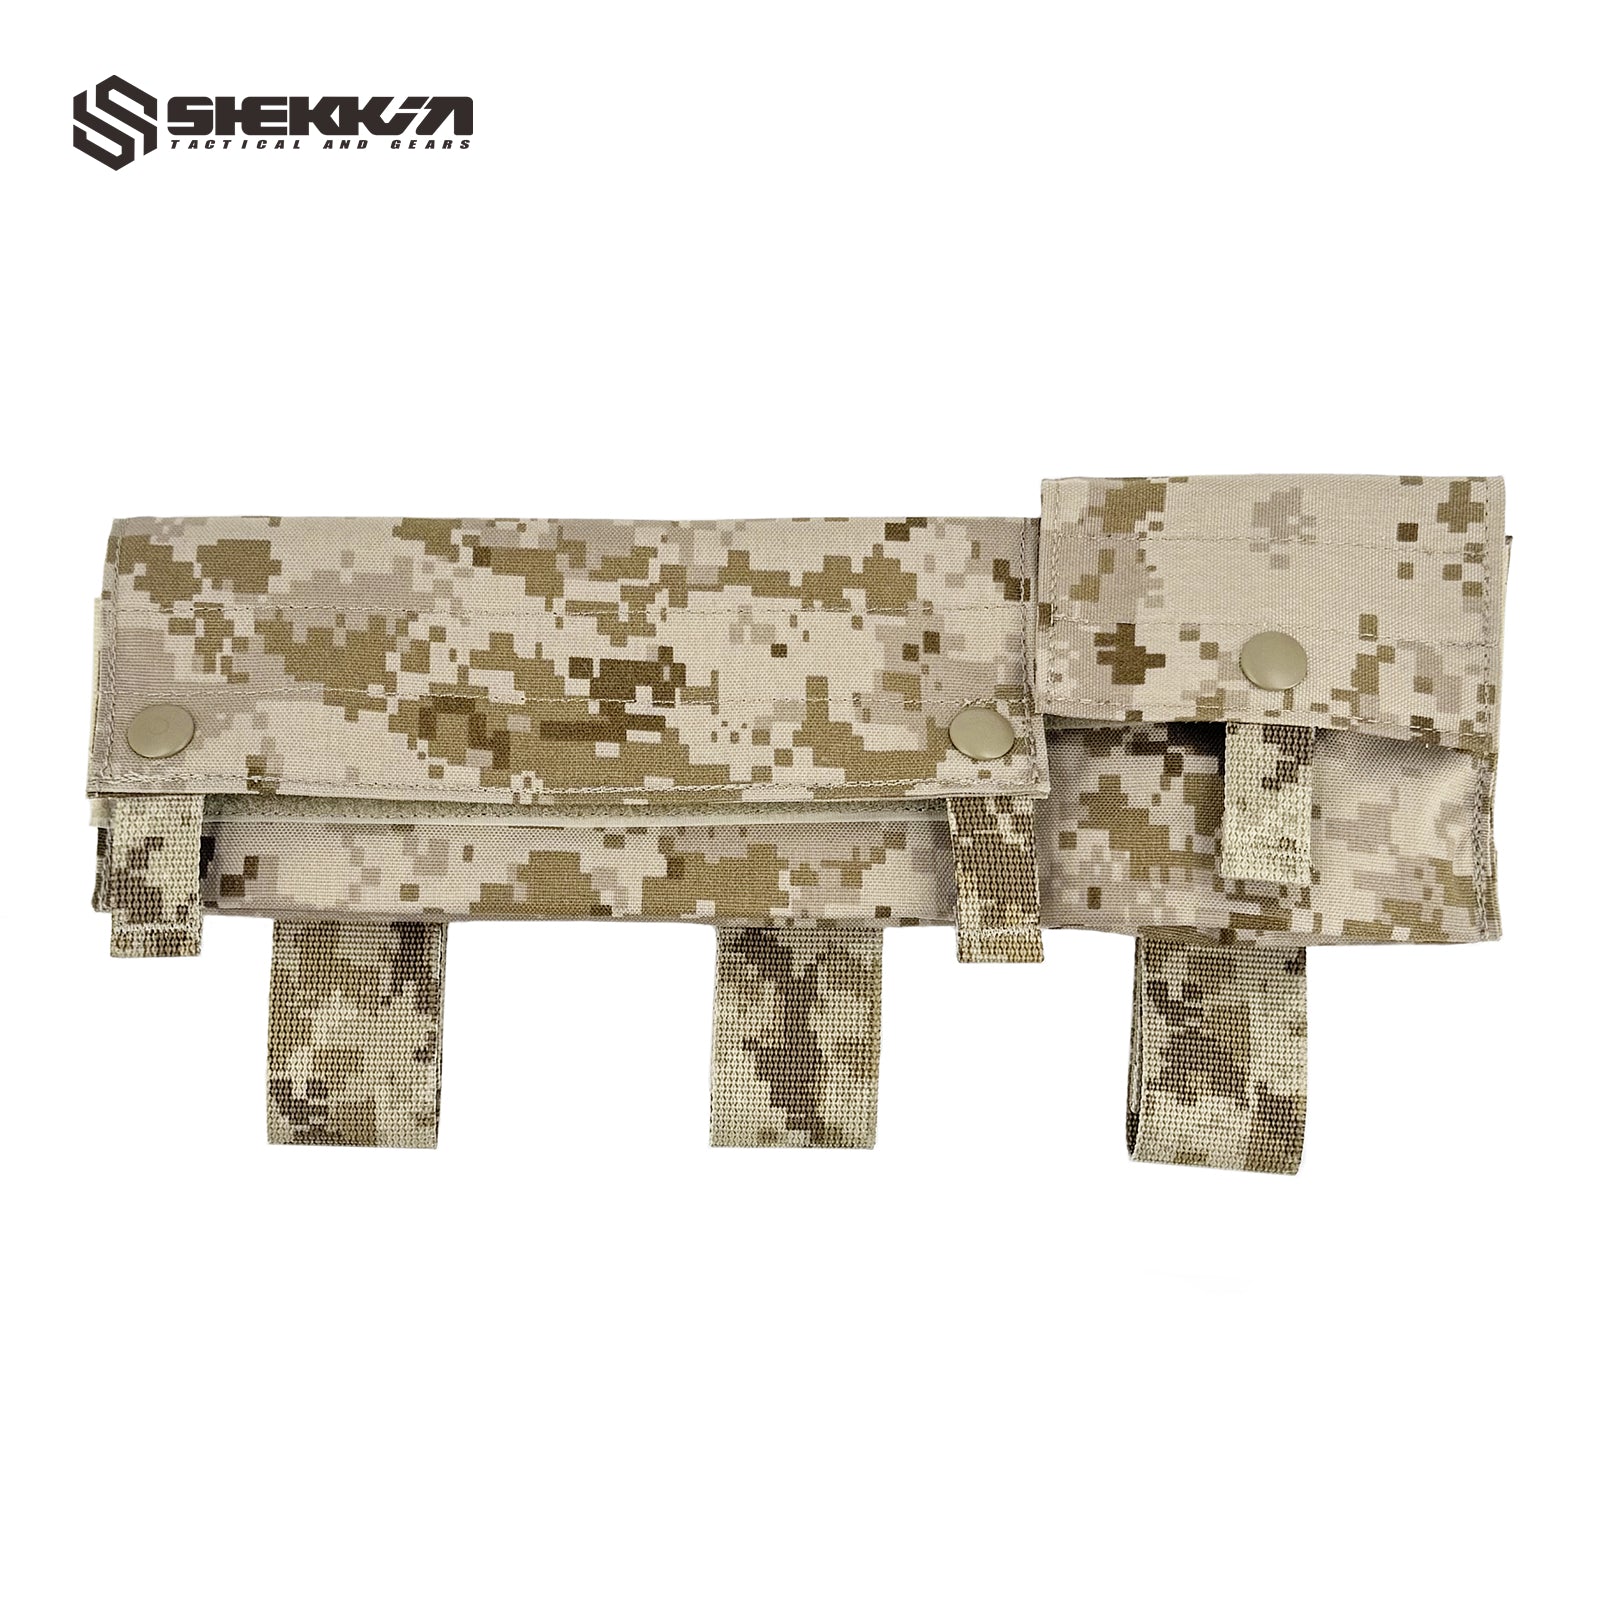 Shekkingears replica LBT2638b inverted Frag and Thermo pouch